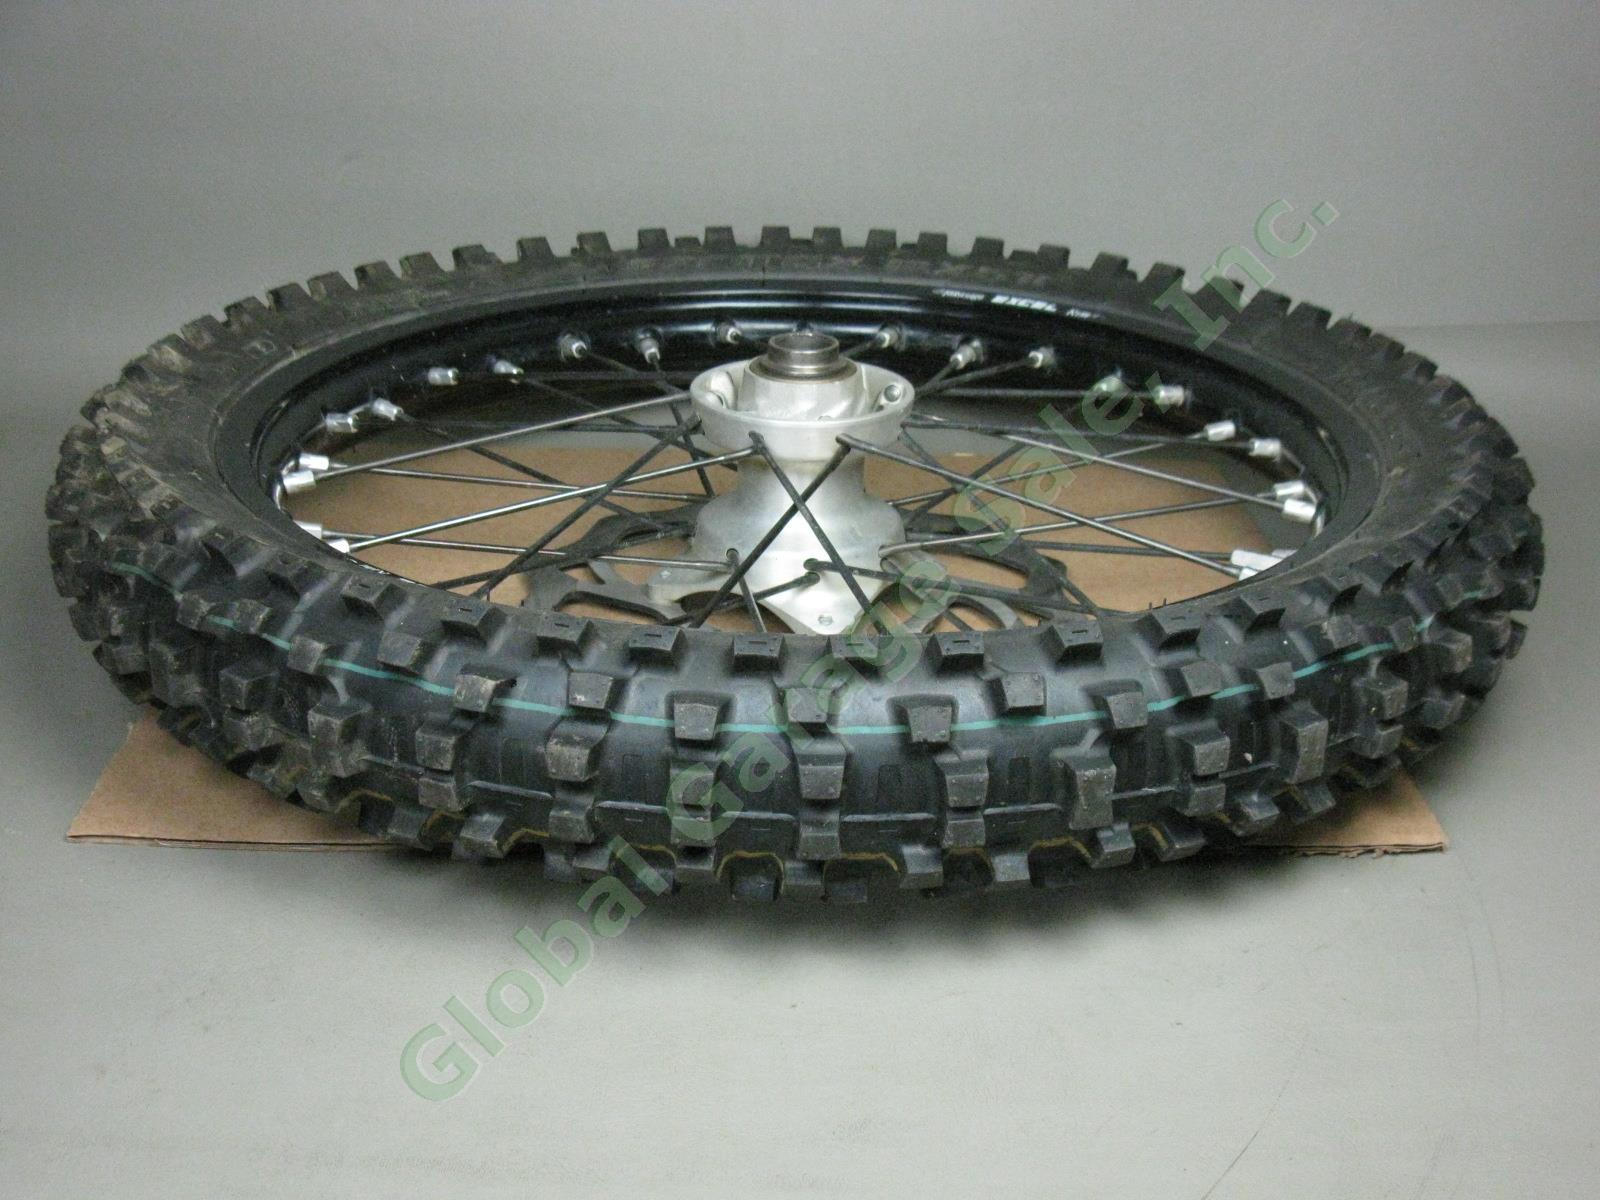 2013-2016 KTM-85 Takasago Excel Black Front Wheel J 17x1.40 + Tire Used One Lap! 6